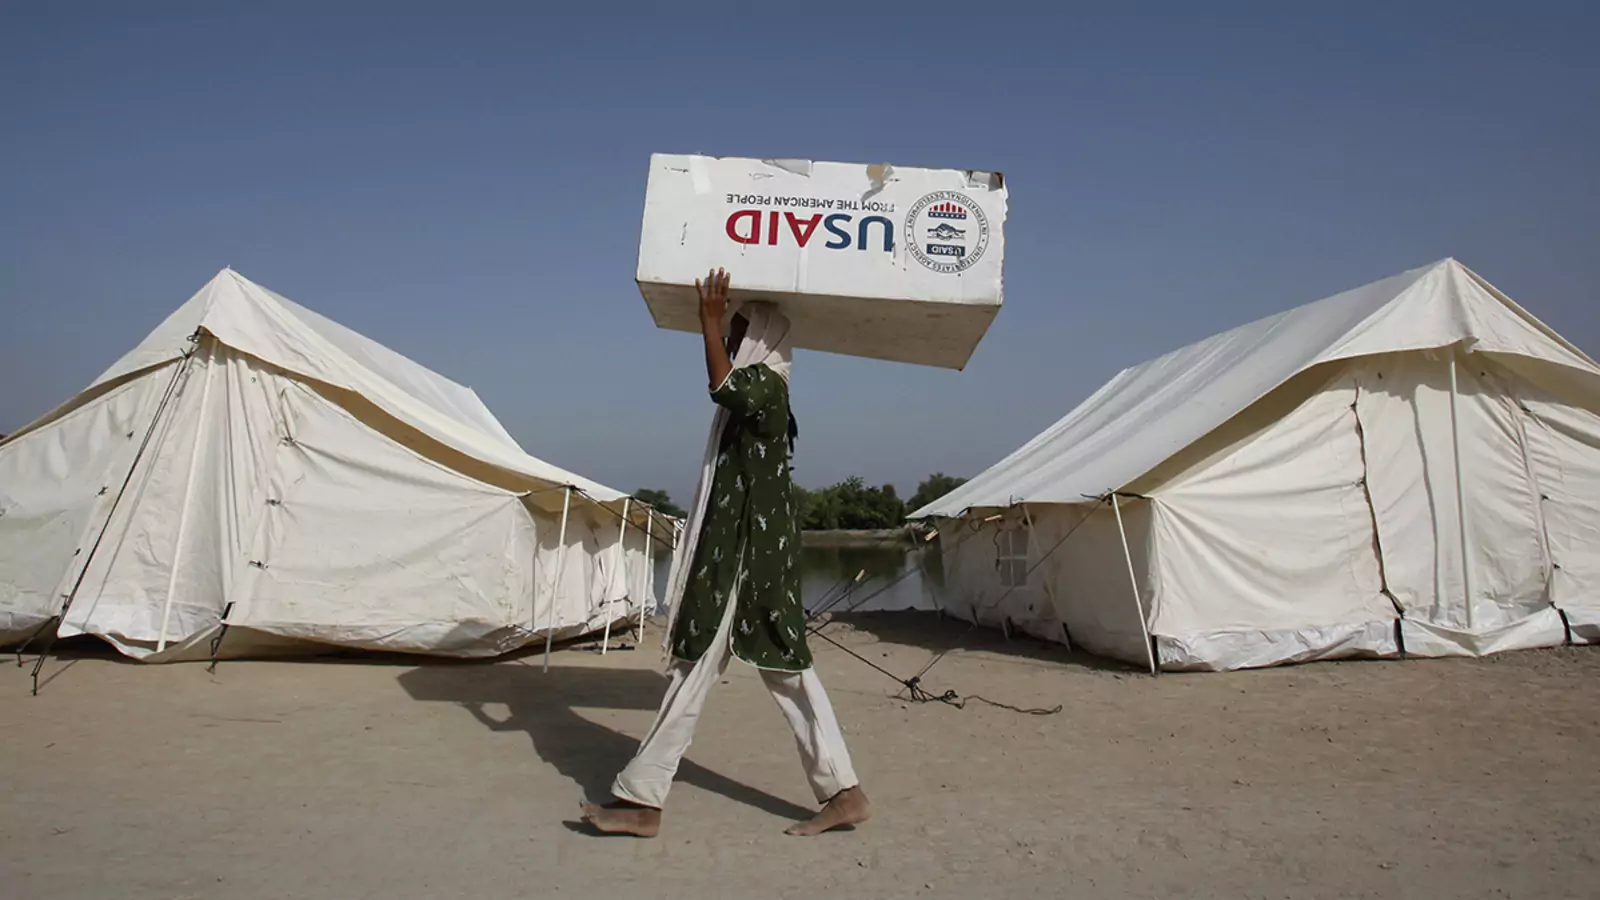 A woman displaced by floods uses a box from the U.S. Agency for International Development, the U.S. government's main foreign aid agency, to move her belongings in Dadu, Pakistan, in 2010.